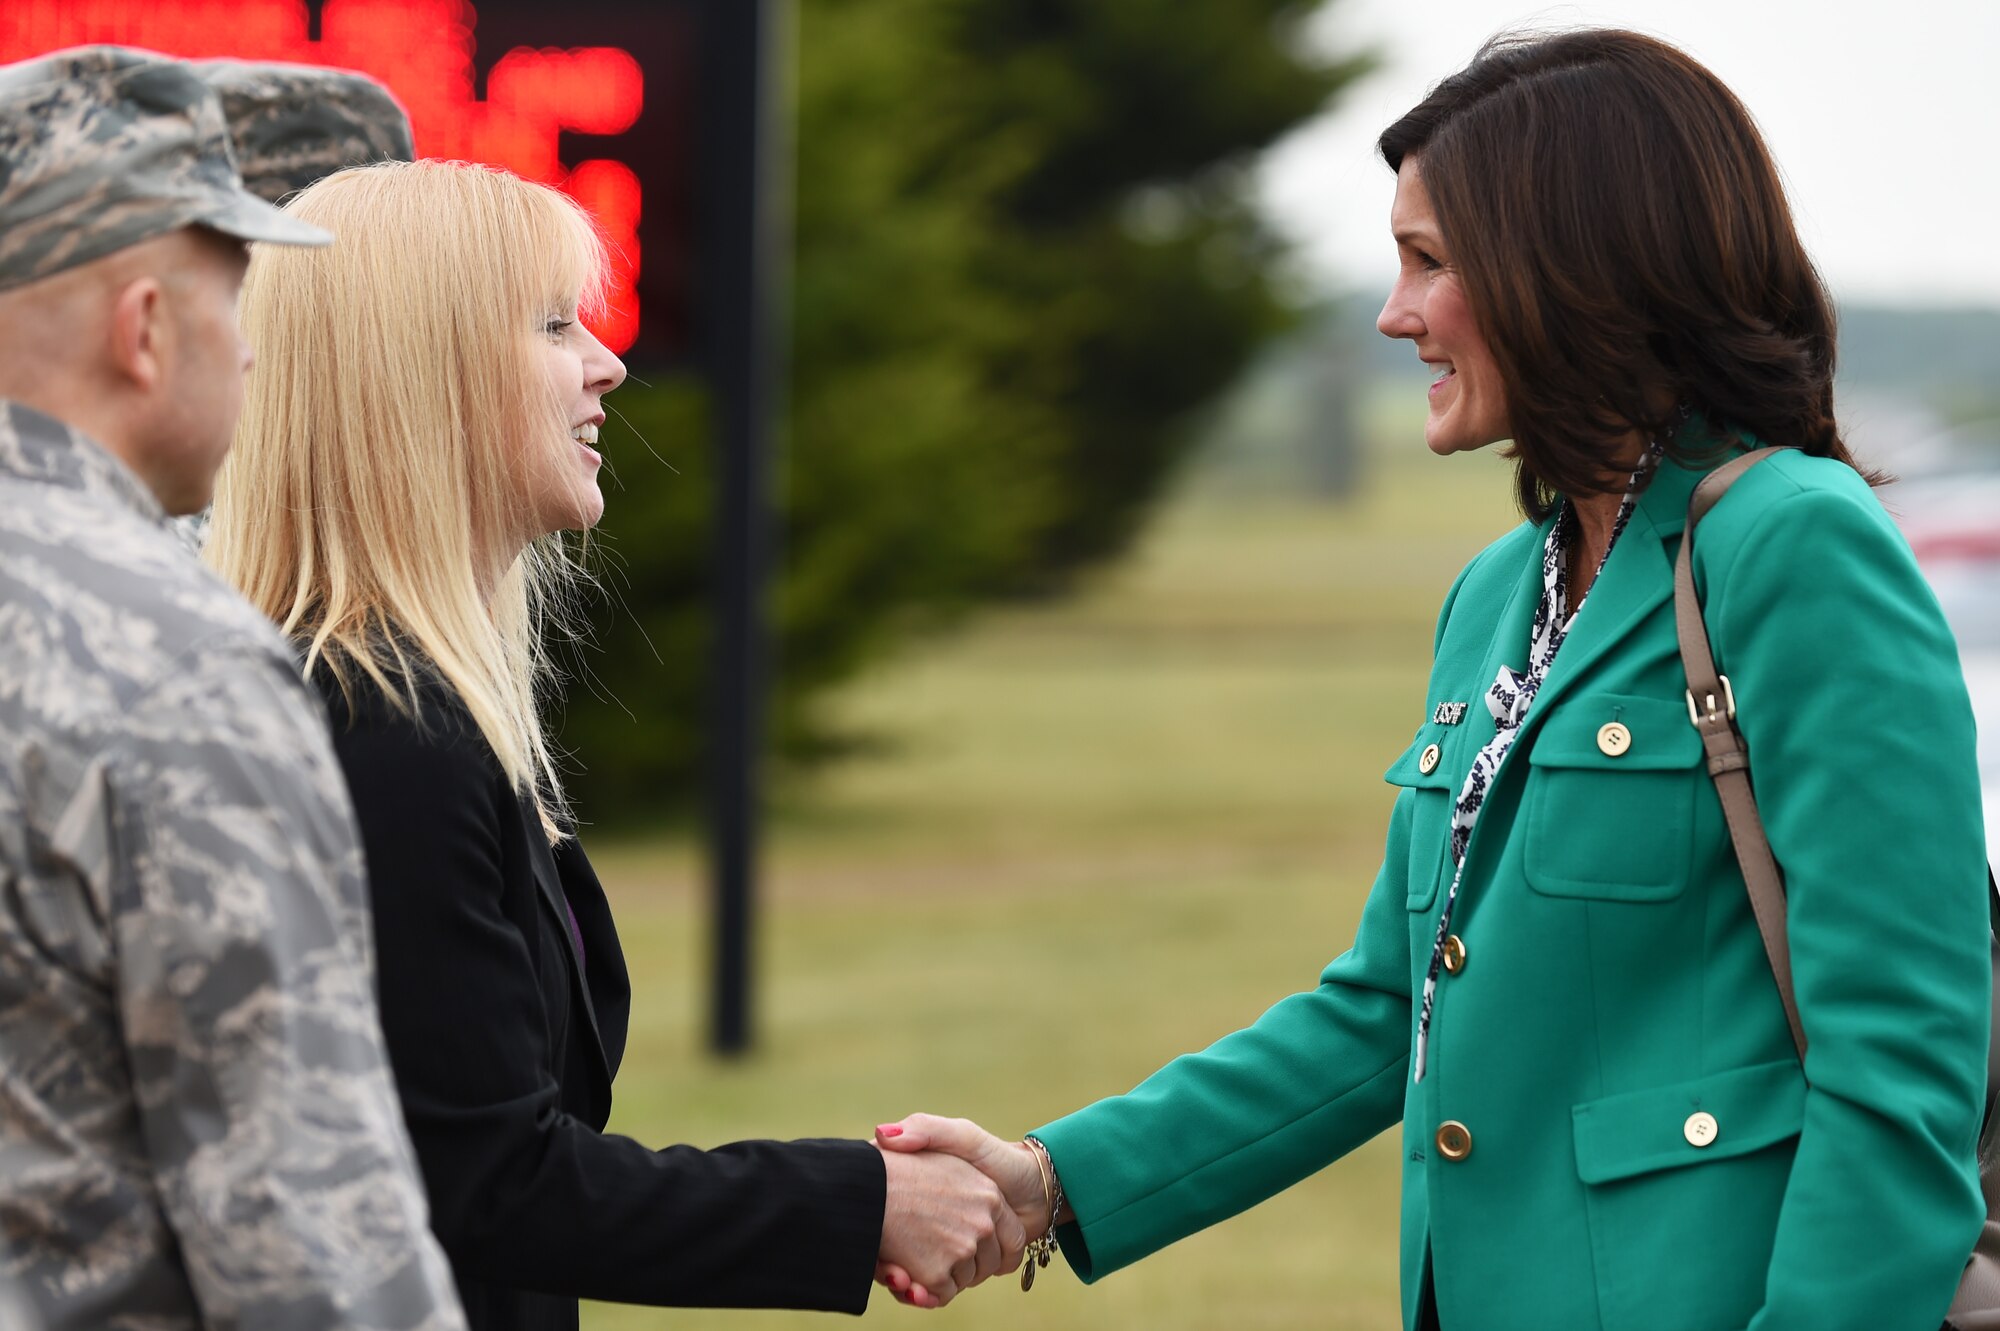 Michelle Mellars, wife of Col. Douglas Mellars, the 422nd Air Base Group commander, greets Betty Welsh, wife of Air Force Chief of Staff Gen. Mark A. Welsh III, at Royal Air Force Croughton, England, July 16, 2015. Welsh visited the installation and spoke with military spouses on the ever-growing key spouse program. (U.S. Air Force photo/Staff Sgt. Jarad A. Denton)